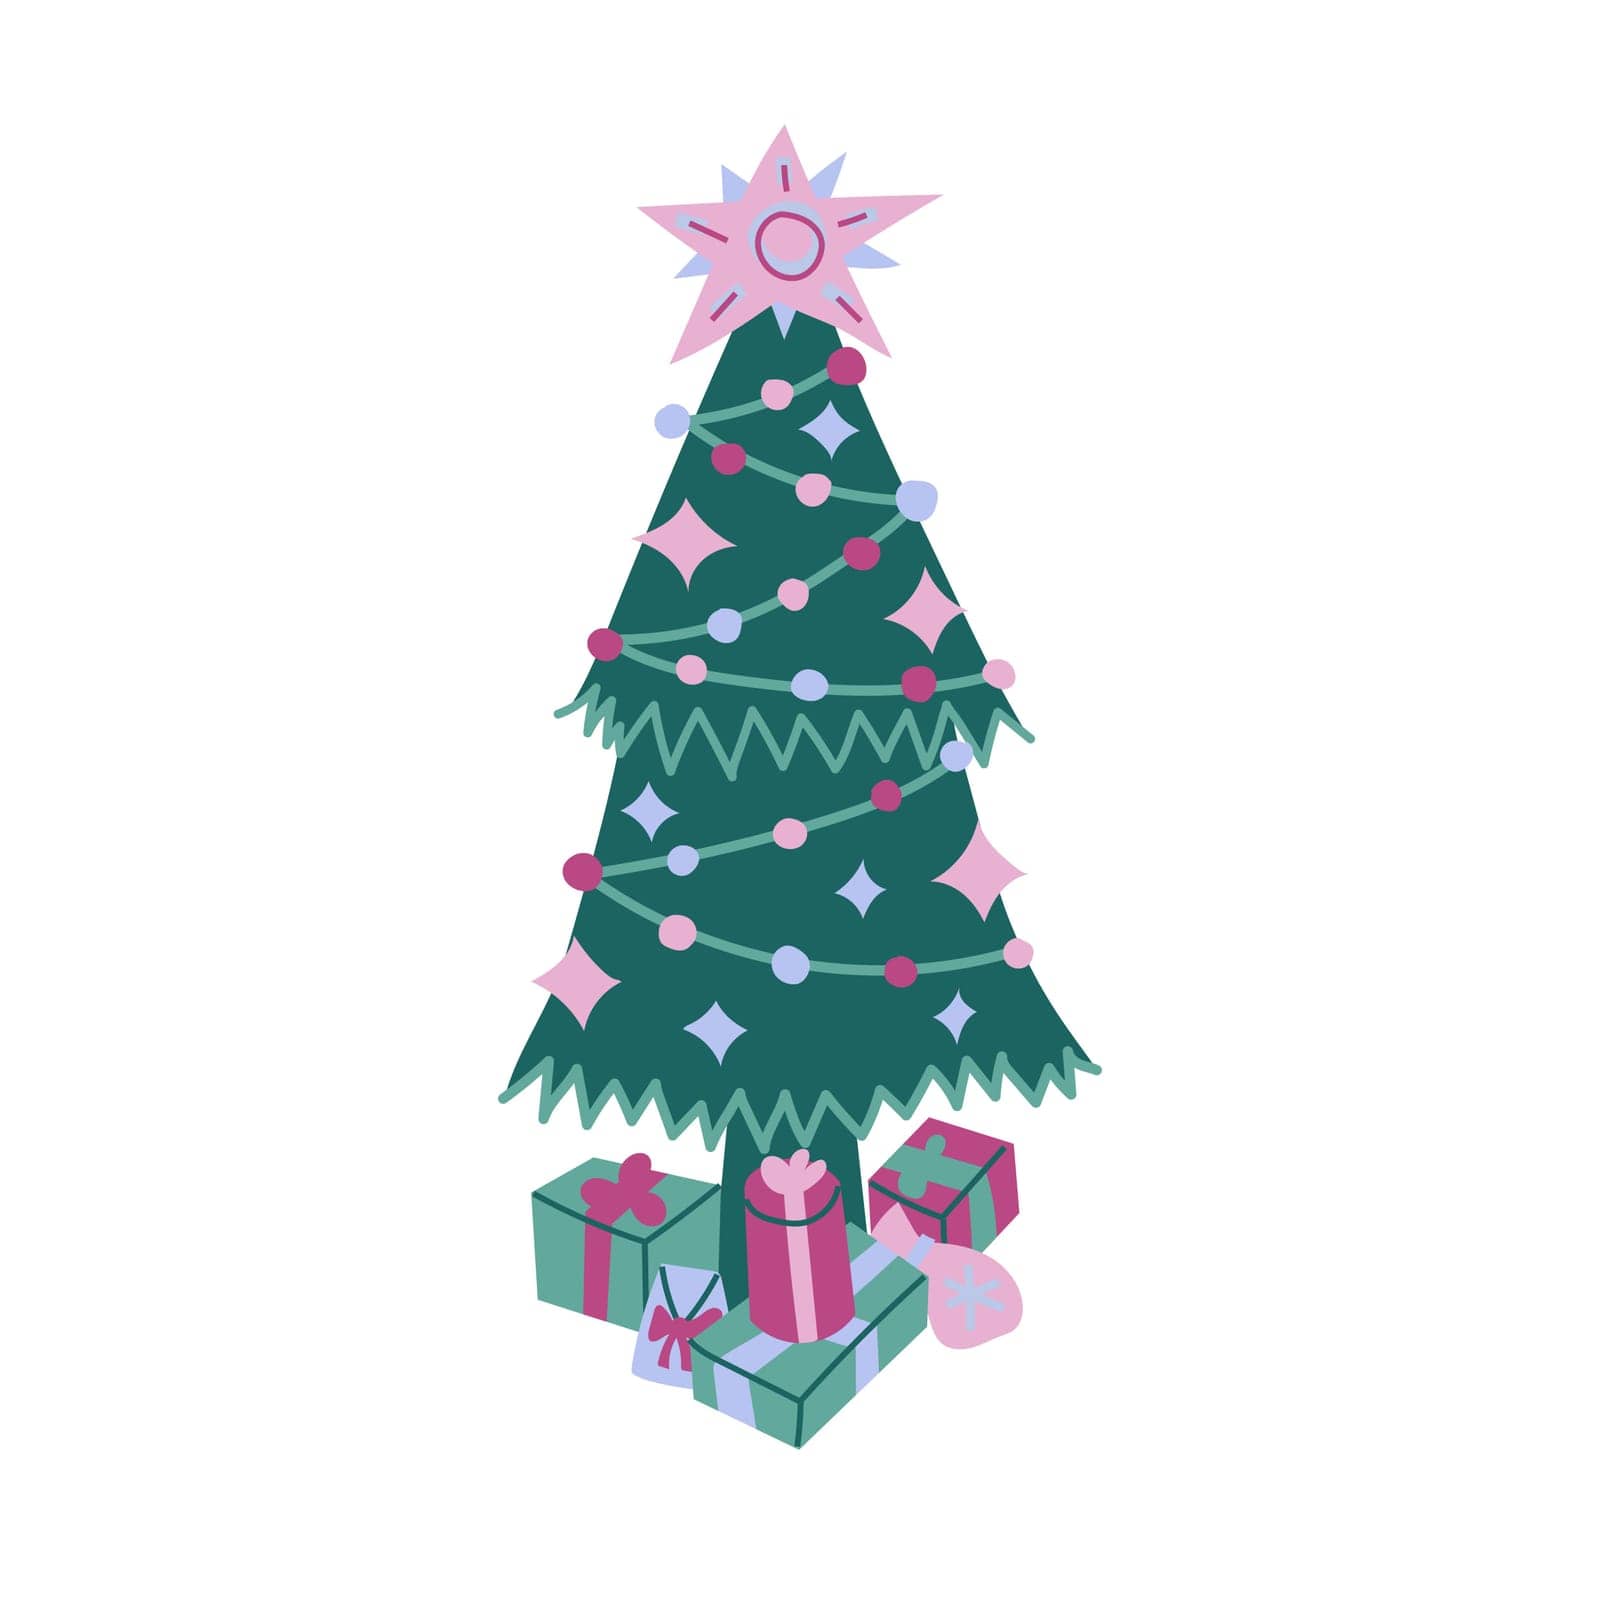 Decorated Christmas tree illustration. A tall fir tree with a star on top, decorated with ornaments and lights, and colorful wrapped gifts underneath. Isolated on a white background.